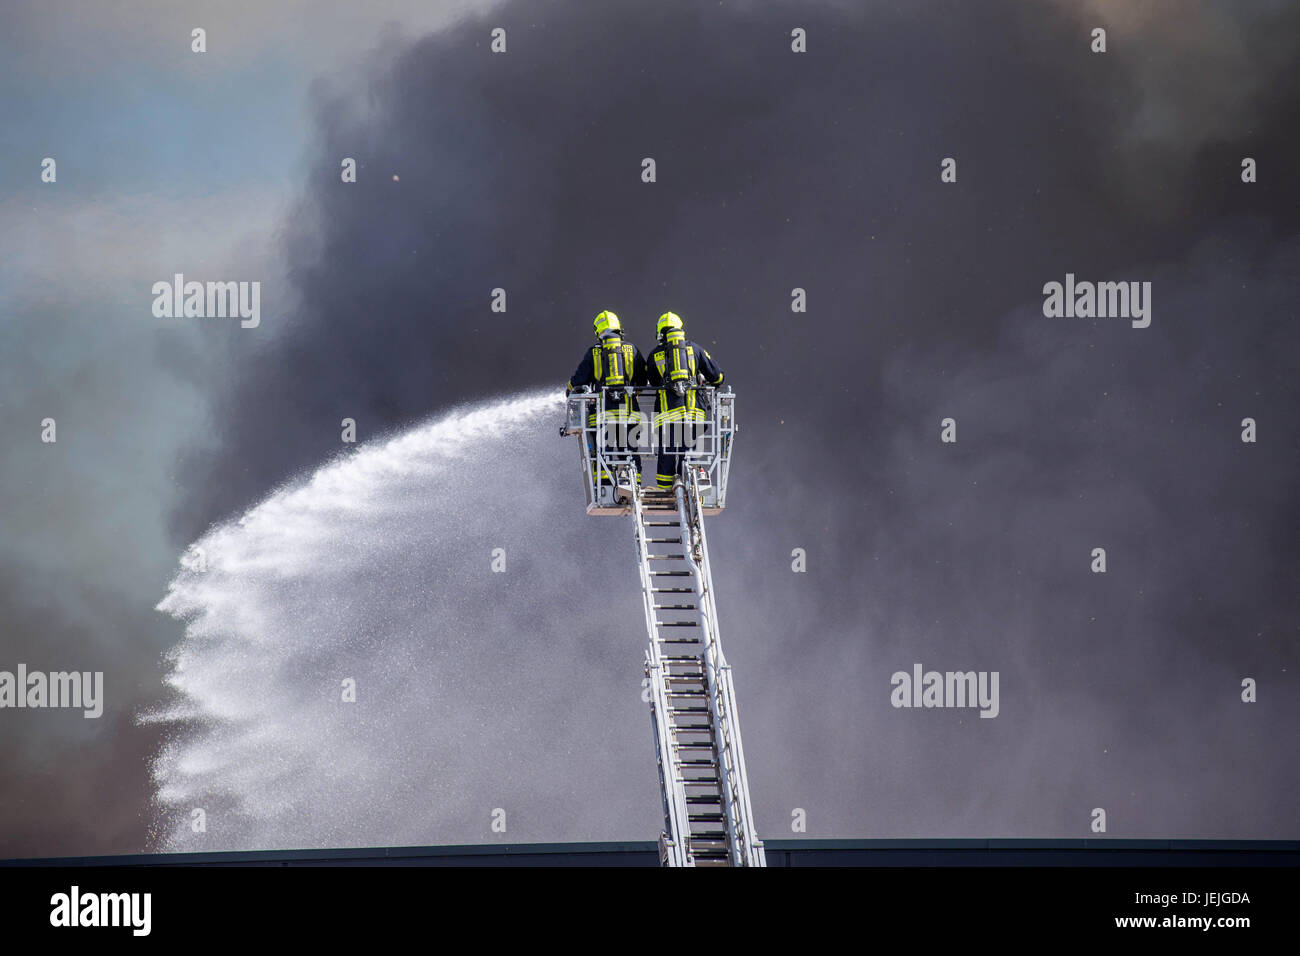 Fire fighters on a ladder fight against the flames inside a furniture manufactury in Elterlein, Germany, 25 June 2017. Photo: Andre März/dpa Stock Photo